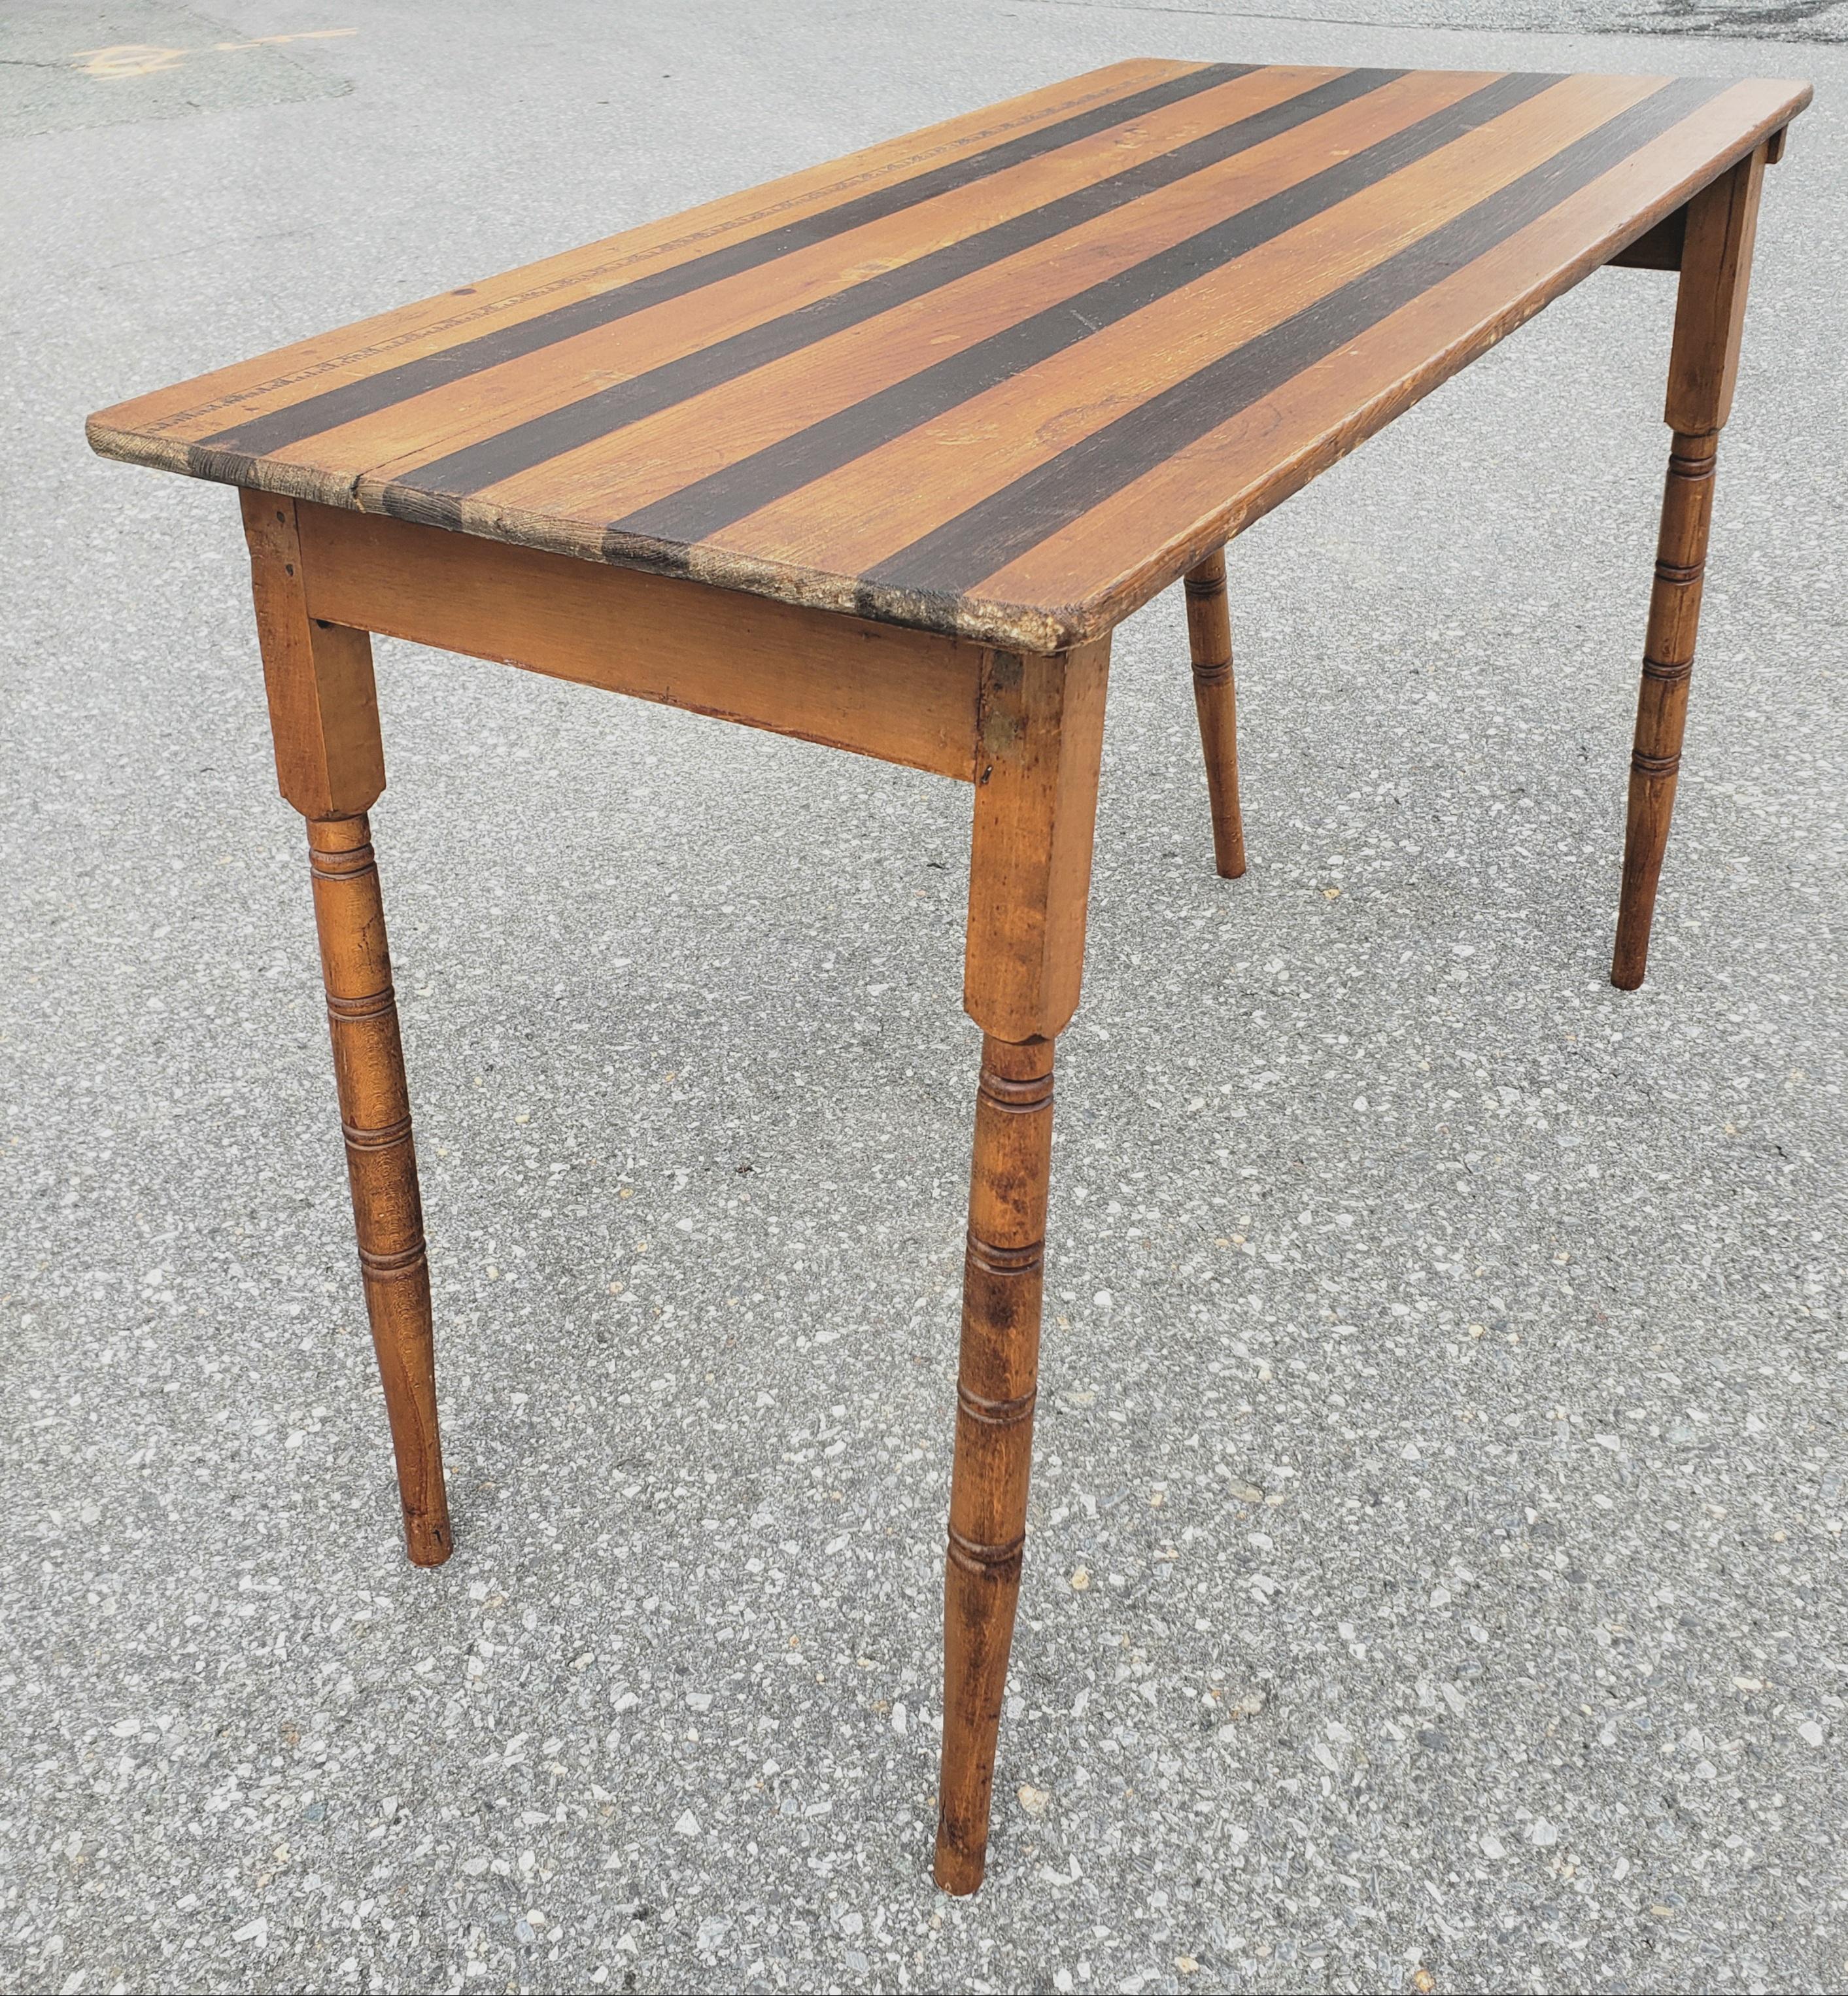 Hand-Crafted Antique Collapsable Wood Industrial Work Table with Ruler For Sale